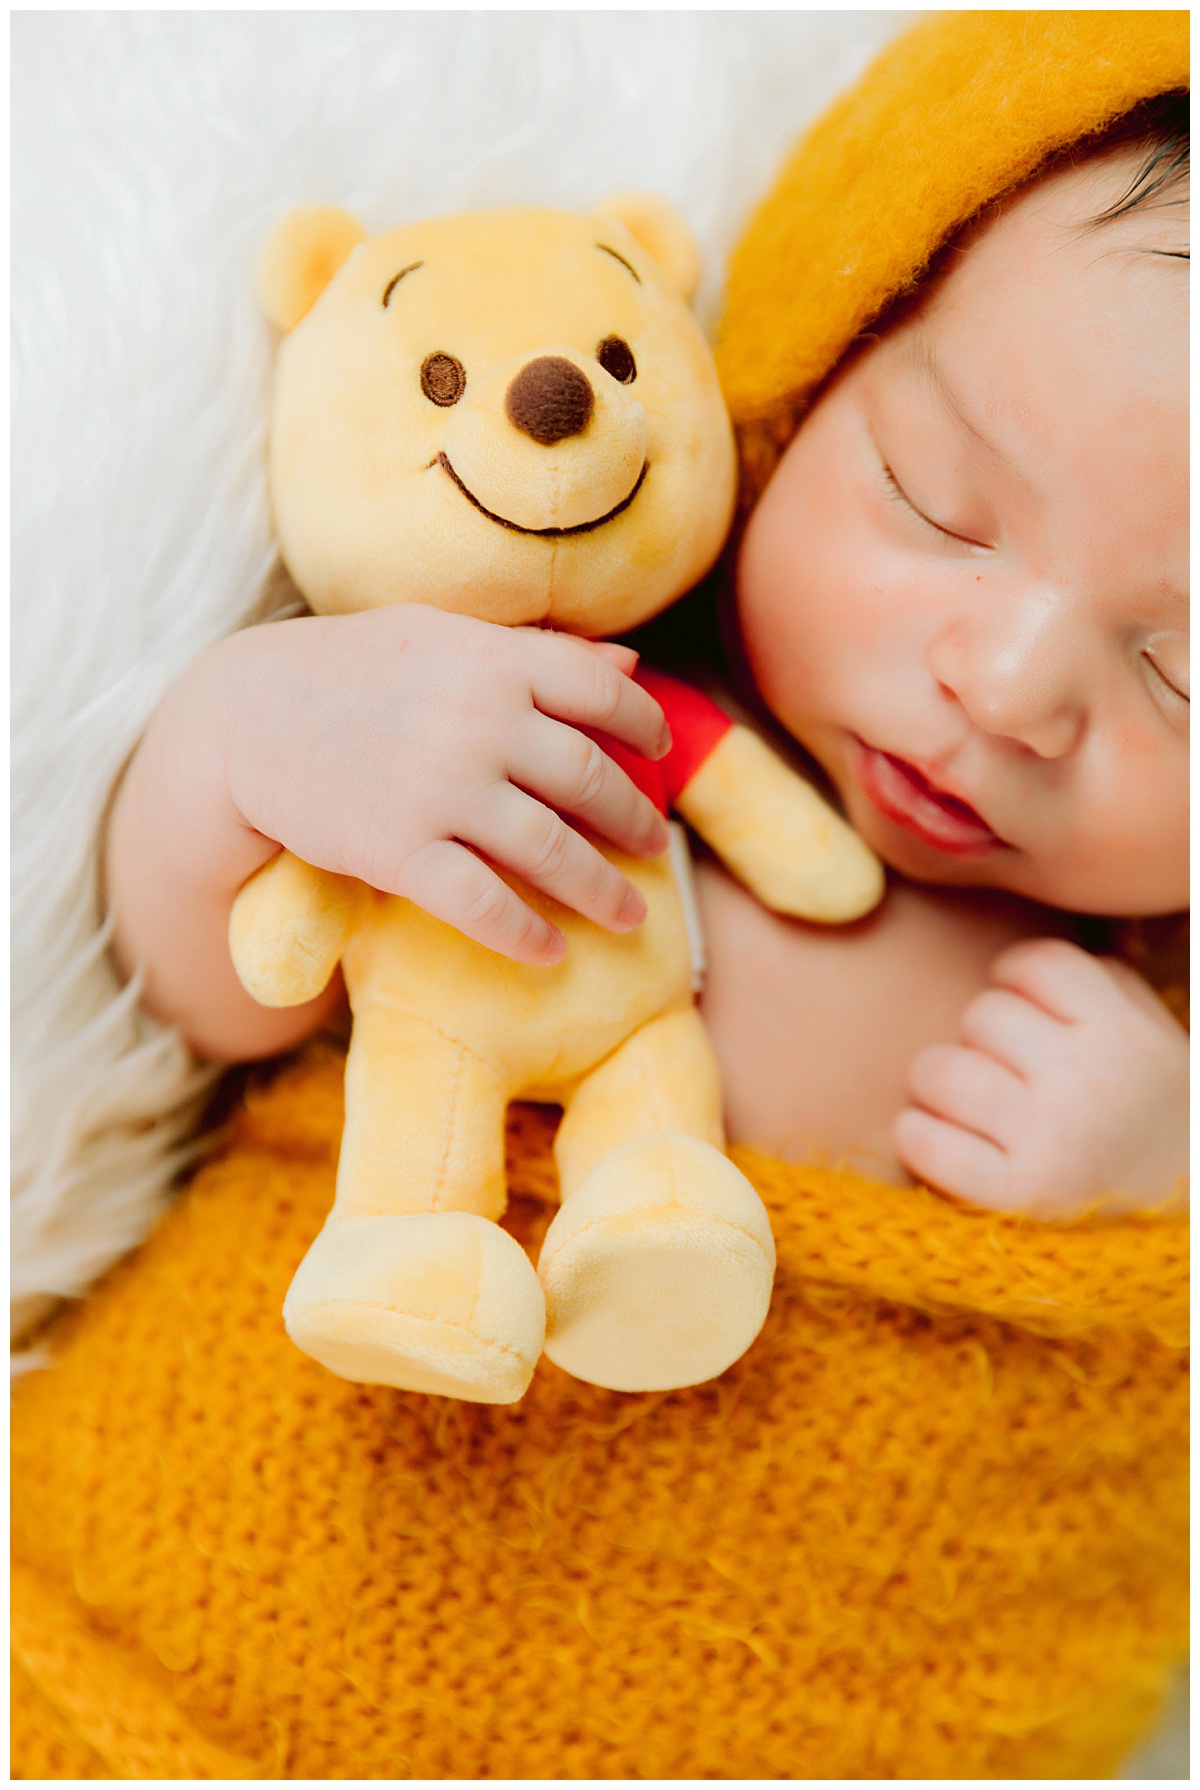 Winnie the Pooh Themed Disney Newborn Photography ideas and inspiration by White Rabbit Photo Boutique